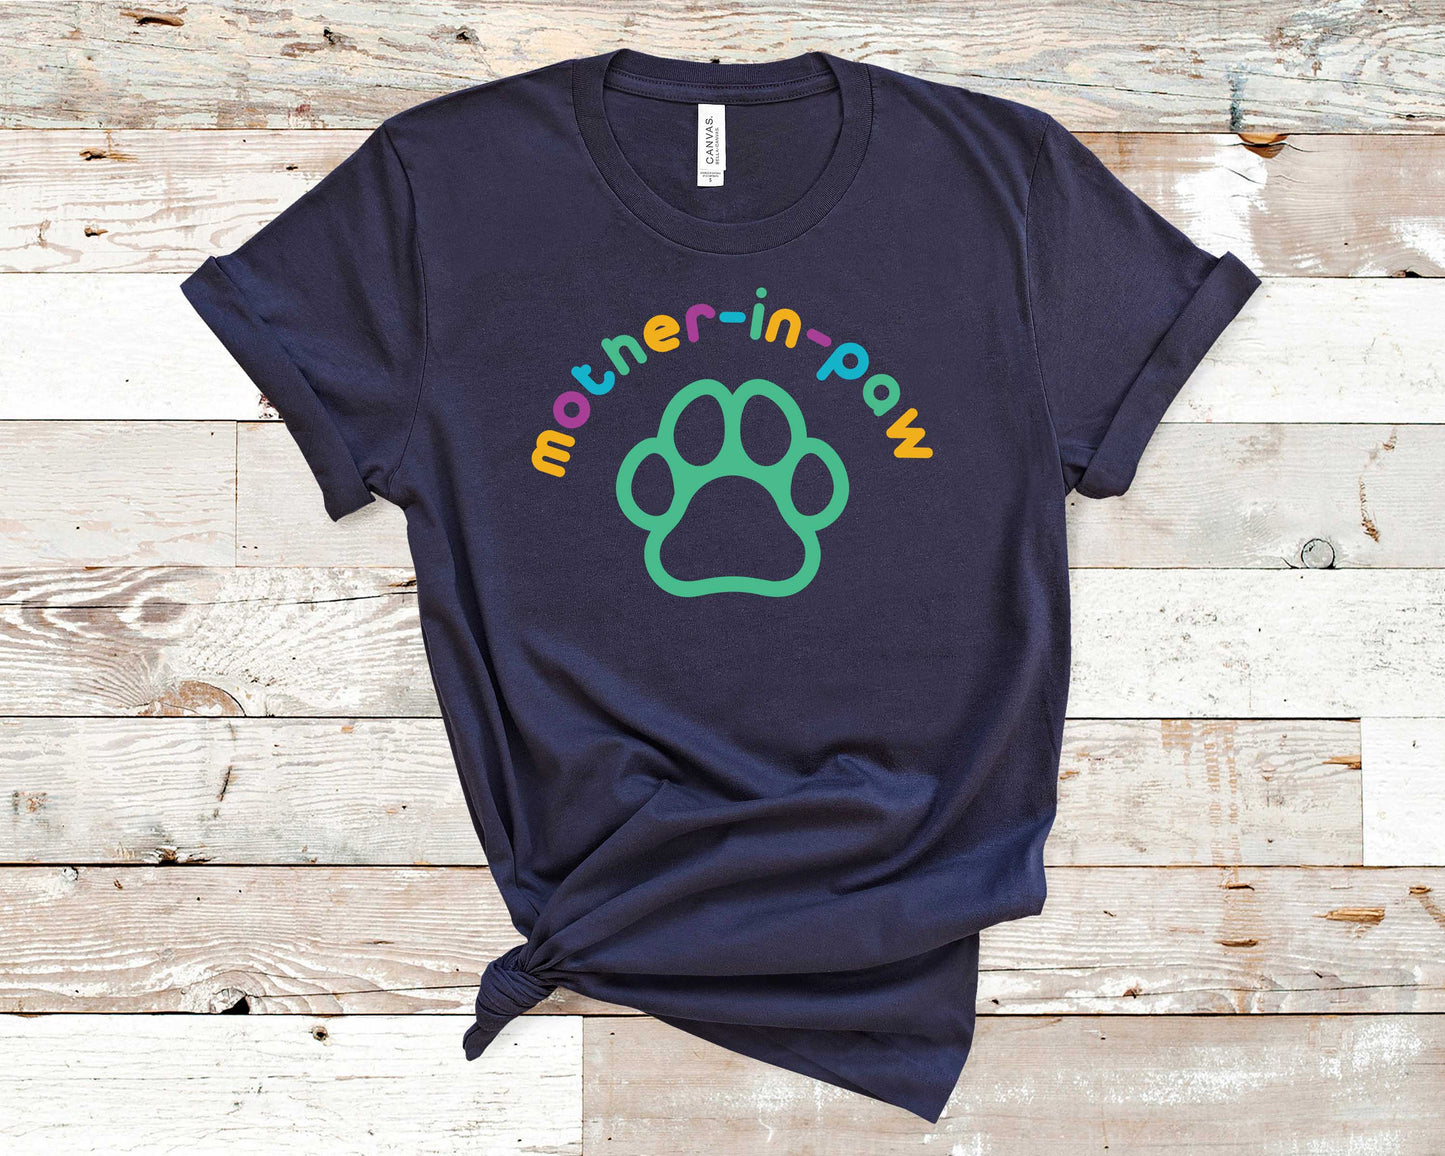 Mother-in-Paw - Pet Lovers Shirt